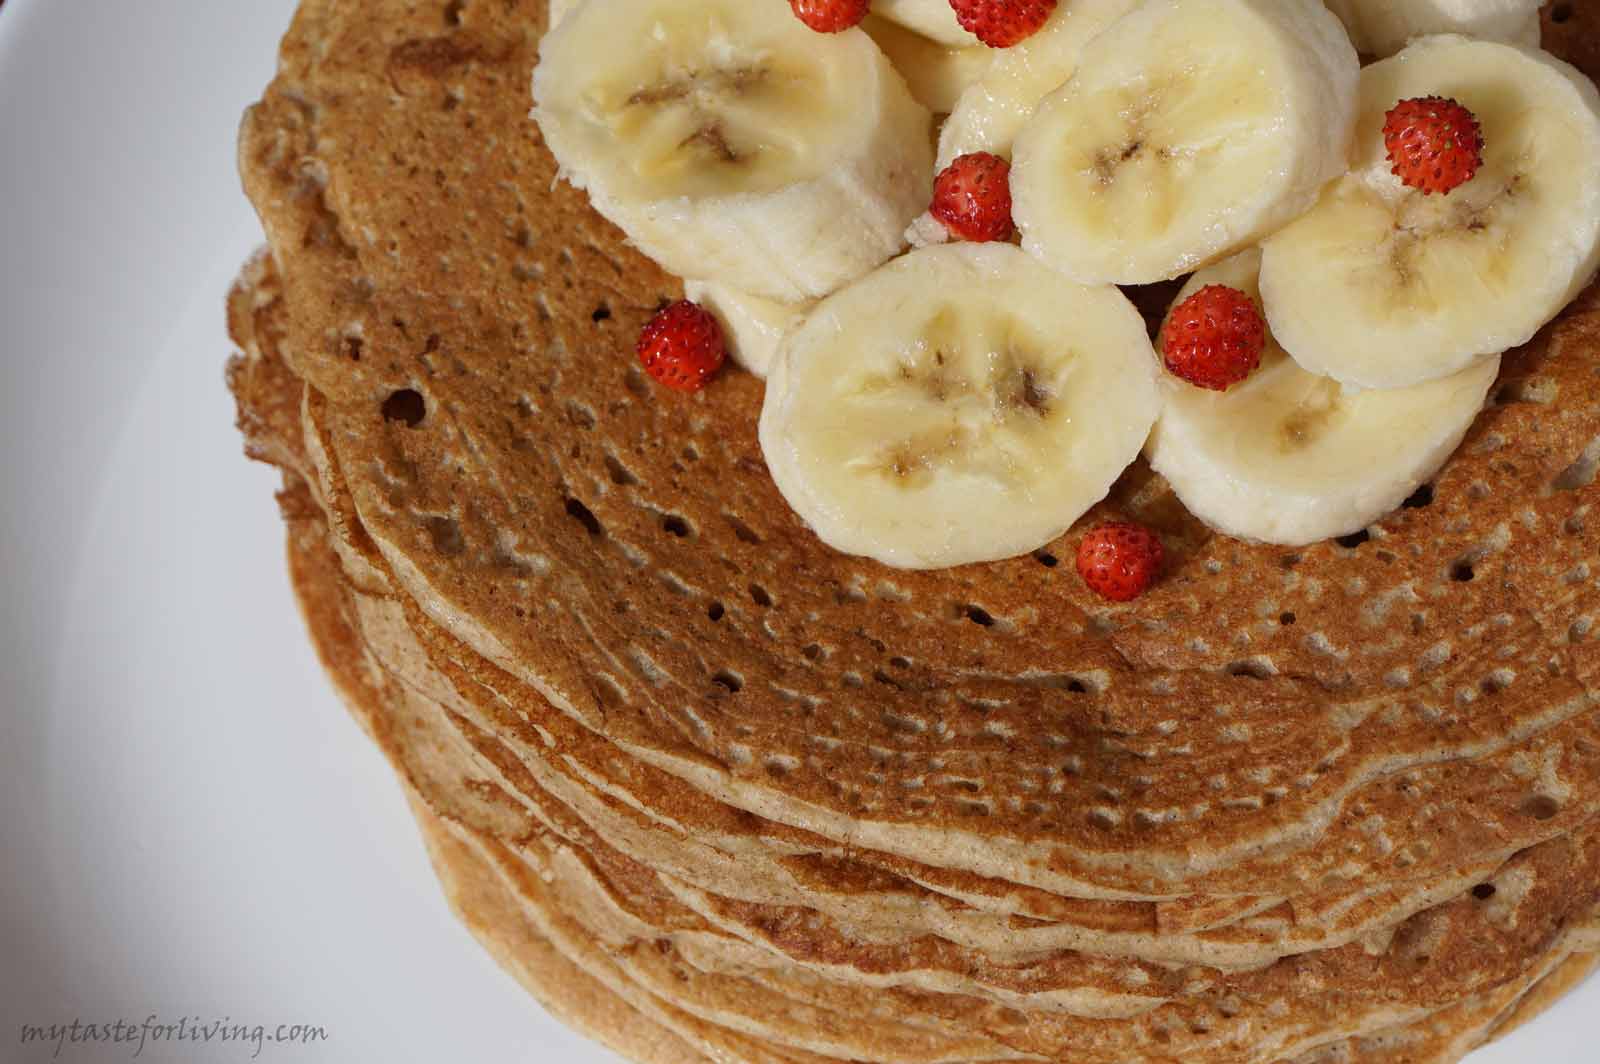 Fluffy banana pancakes made with whole wheat flour, cinnamon and non-dairy milk.